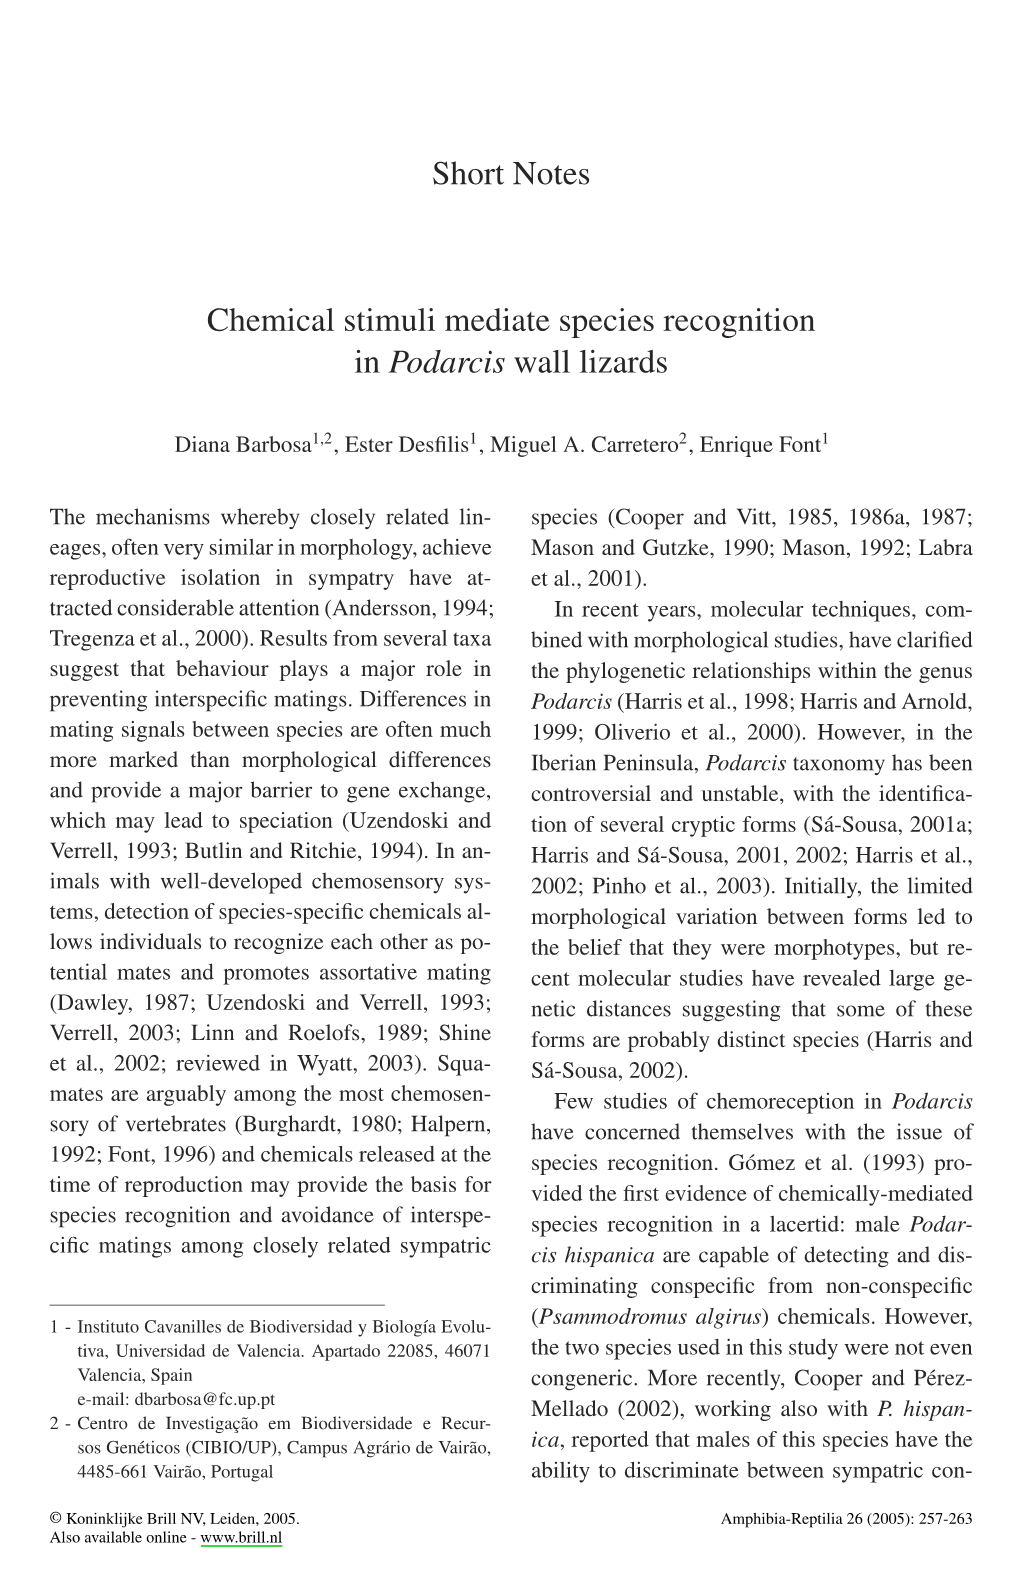 Short Notes Chemical Stimuli Mediate Species Recognition in Podarcis Wall